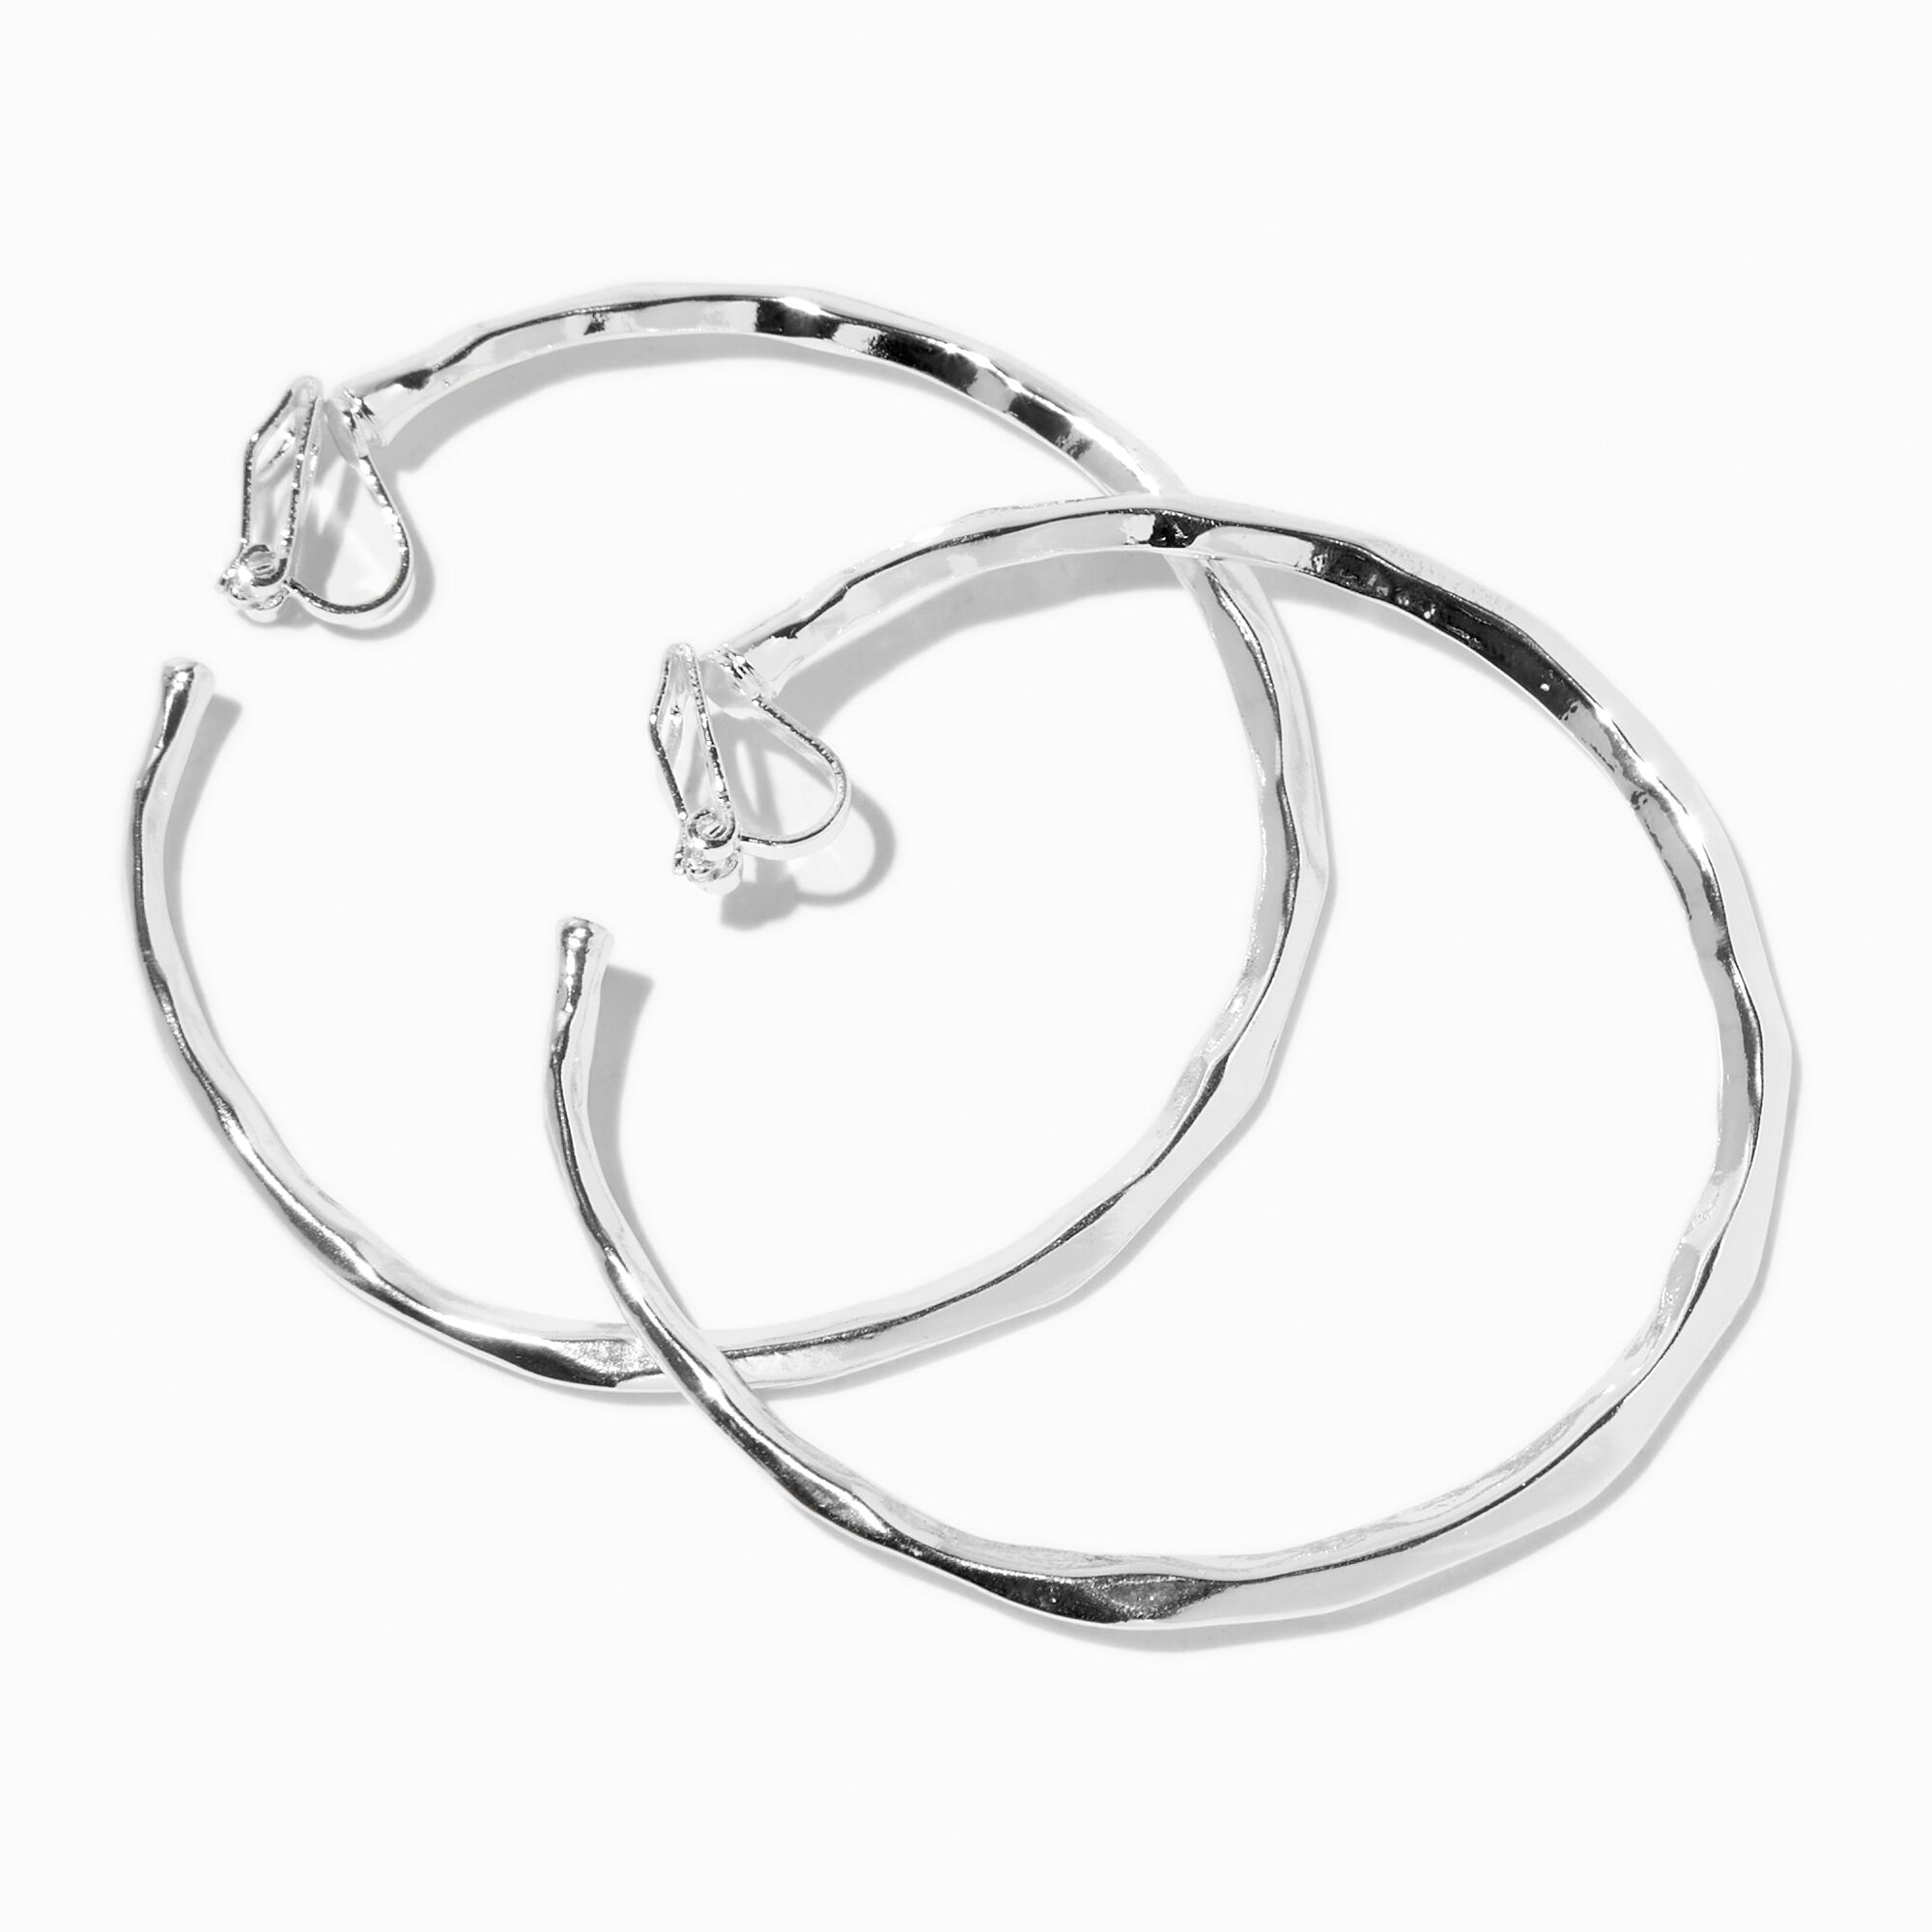 View Claires Tone 60MM Molten ClipOn Hoop Earrings Silver information